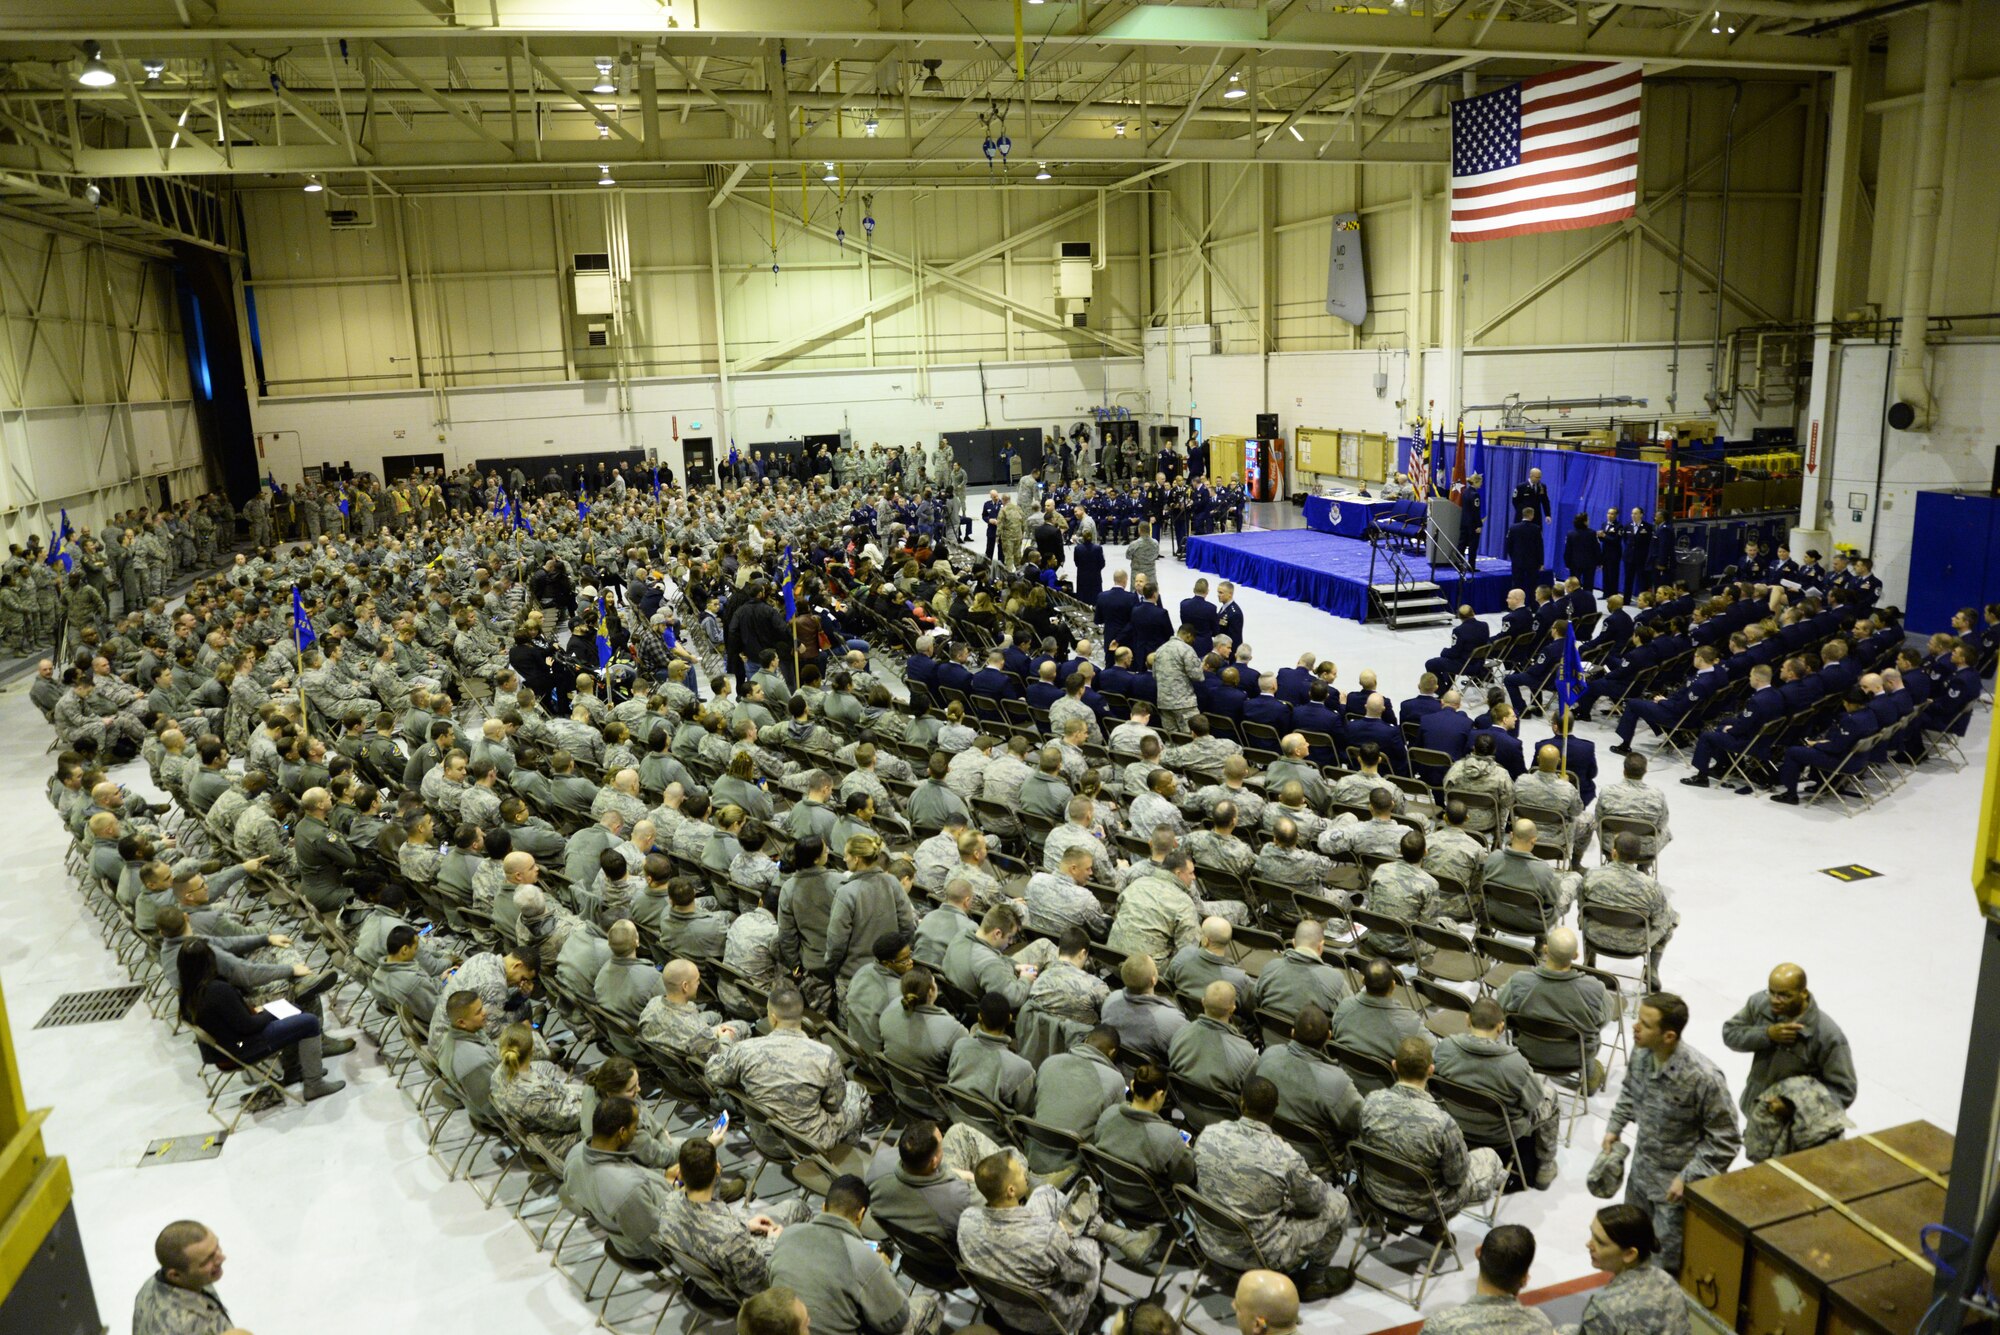 Members of the Maryland Air National Guard, friends and family gather at Warfield Air National Guard Base, Baltimore, Md., for a change of command and the Airman Recognition Ceremony December 6, 2015. During the ceremony Brig. Gen. Randolph Staudenraus assumed command of the 175th Wing from Brig. Gen. Scott L. Kelly. (U.S. Air National Guard photo by Airman 1st Class Enjoli Saunders/RELEASED)